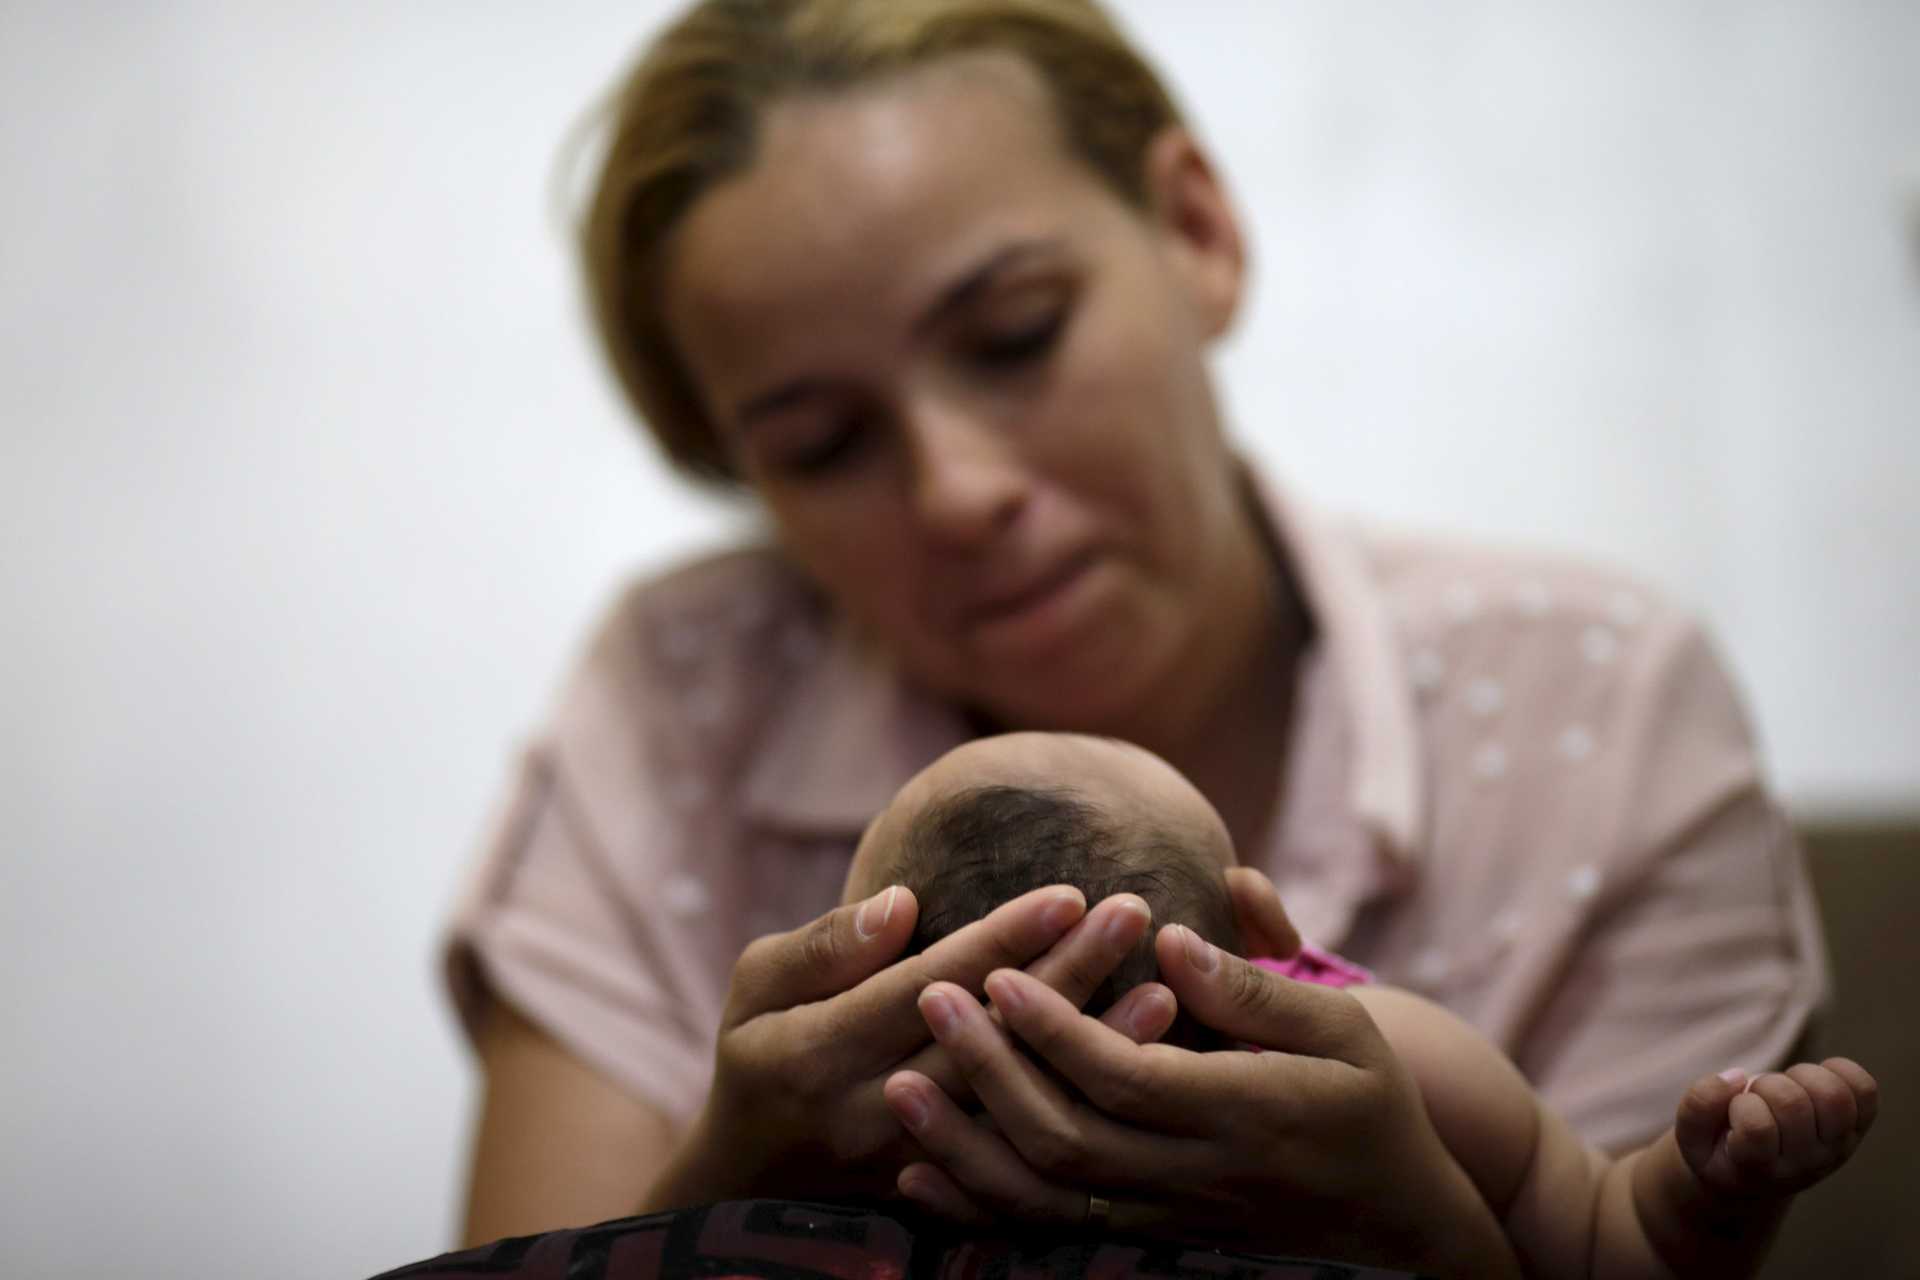 Gleyse Kelly holds the head of her daughter Maria Geovana, who has microcephaly, in Recife